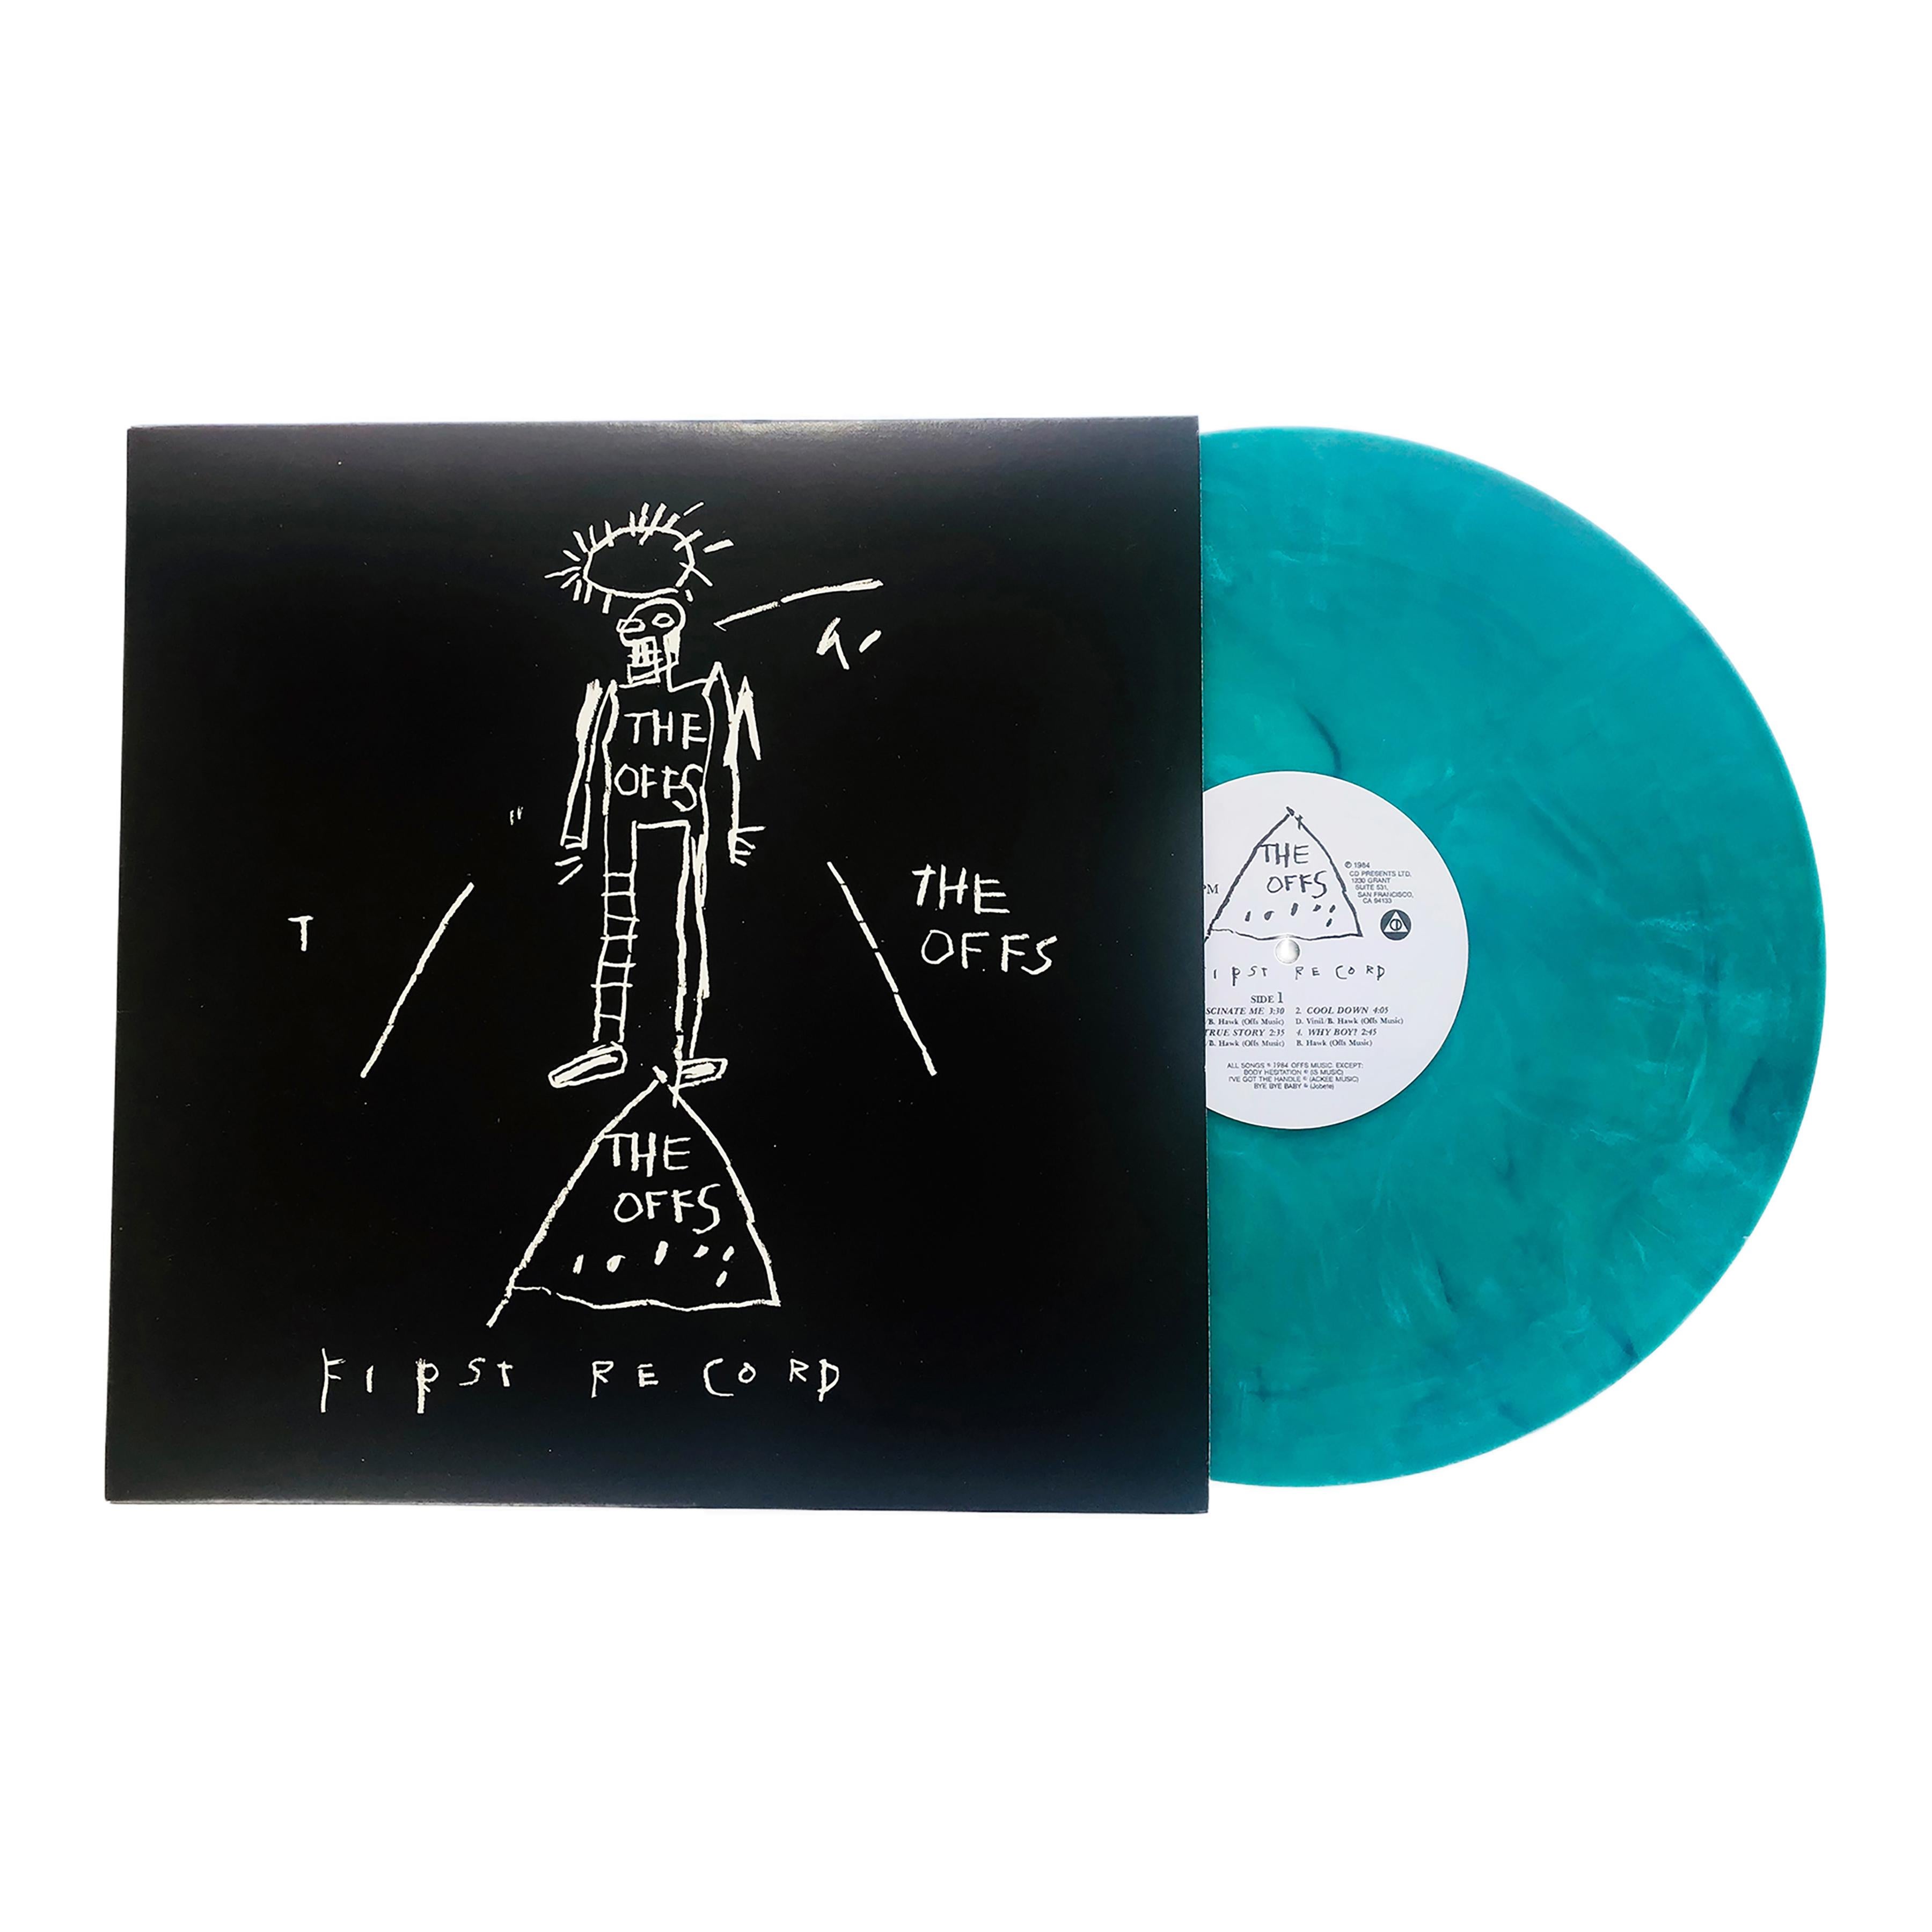 The OFFS 35th Anniversary Vinyl Album, Cover Art by Jean-Michel Basquiat - Mixed Media Art by after Jean-Michel Basquiat